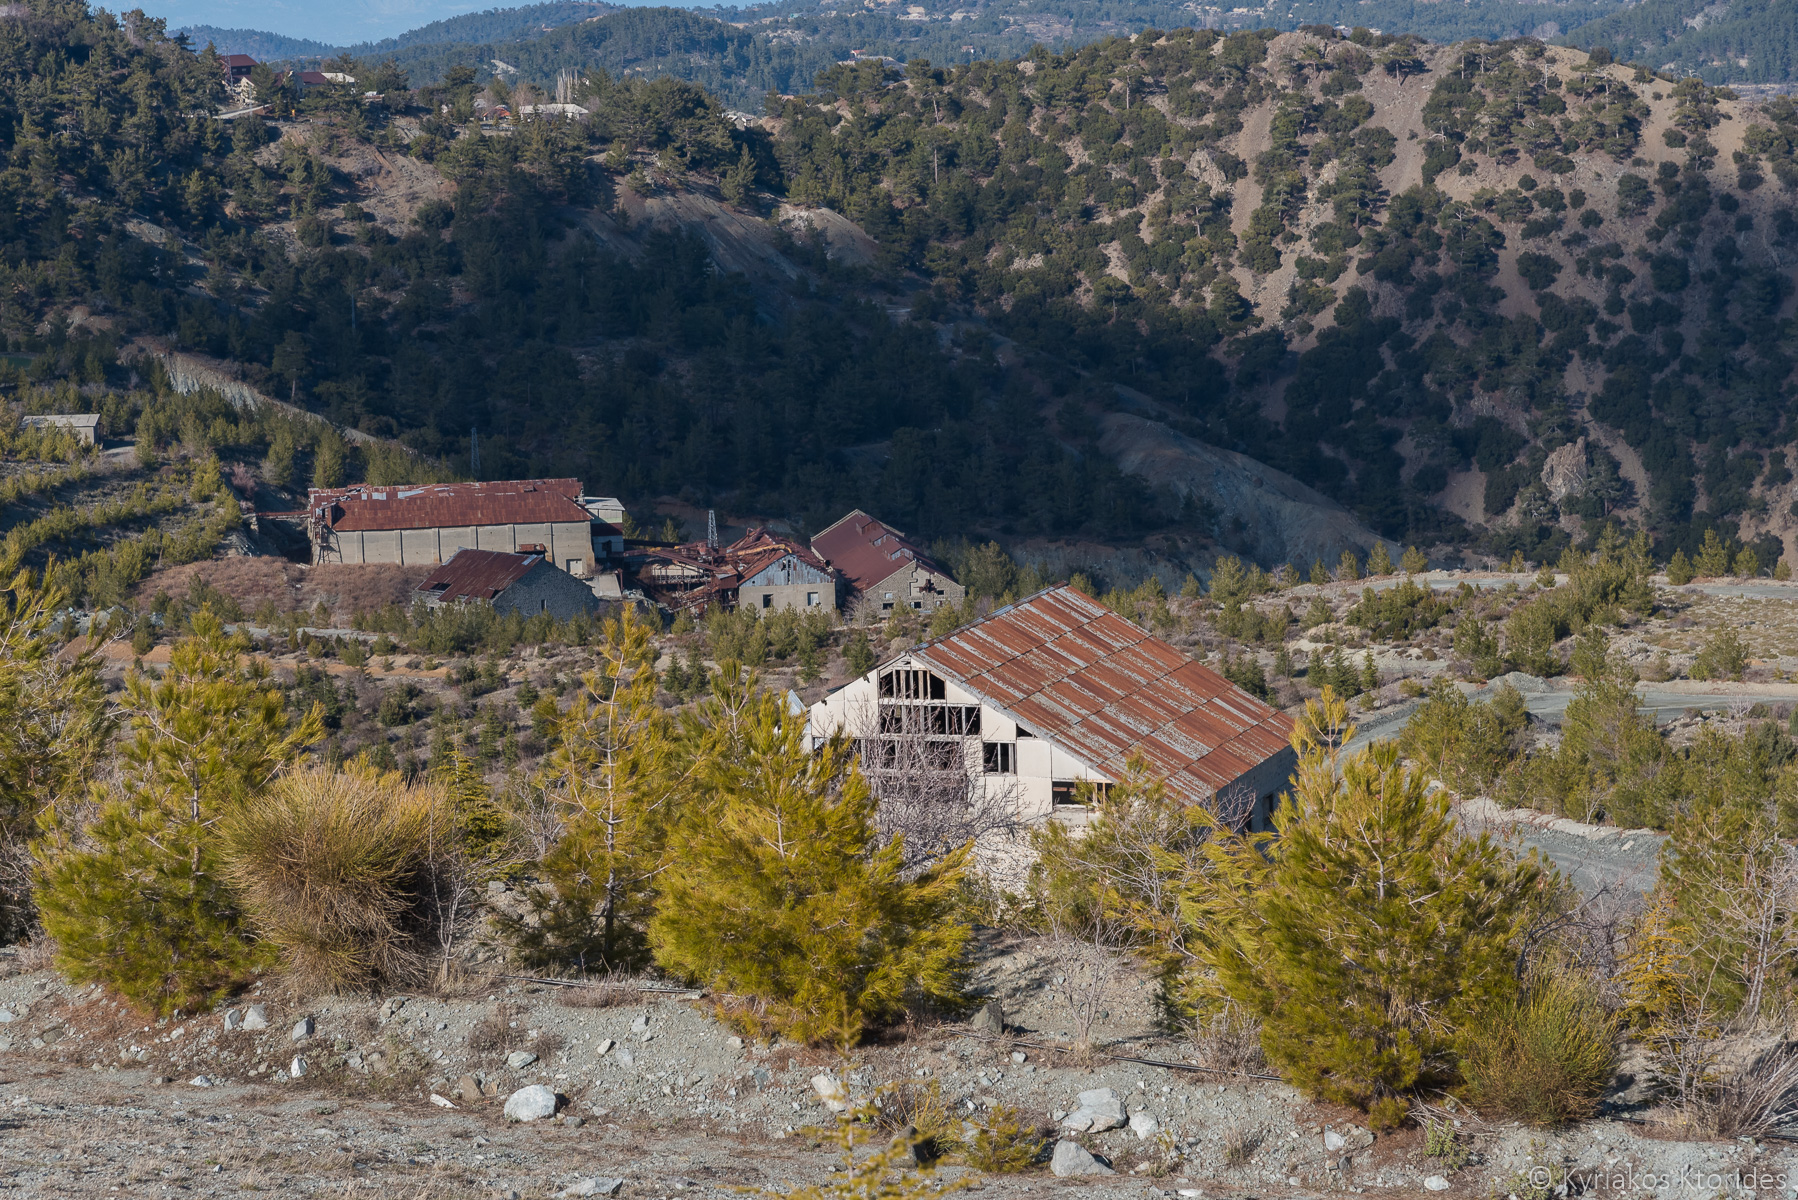 The abandoned buildings viewed from the peak.